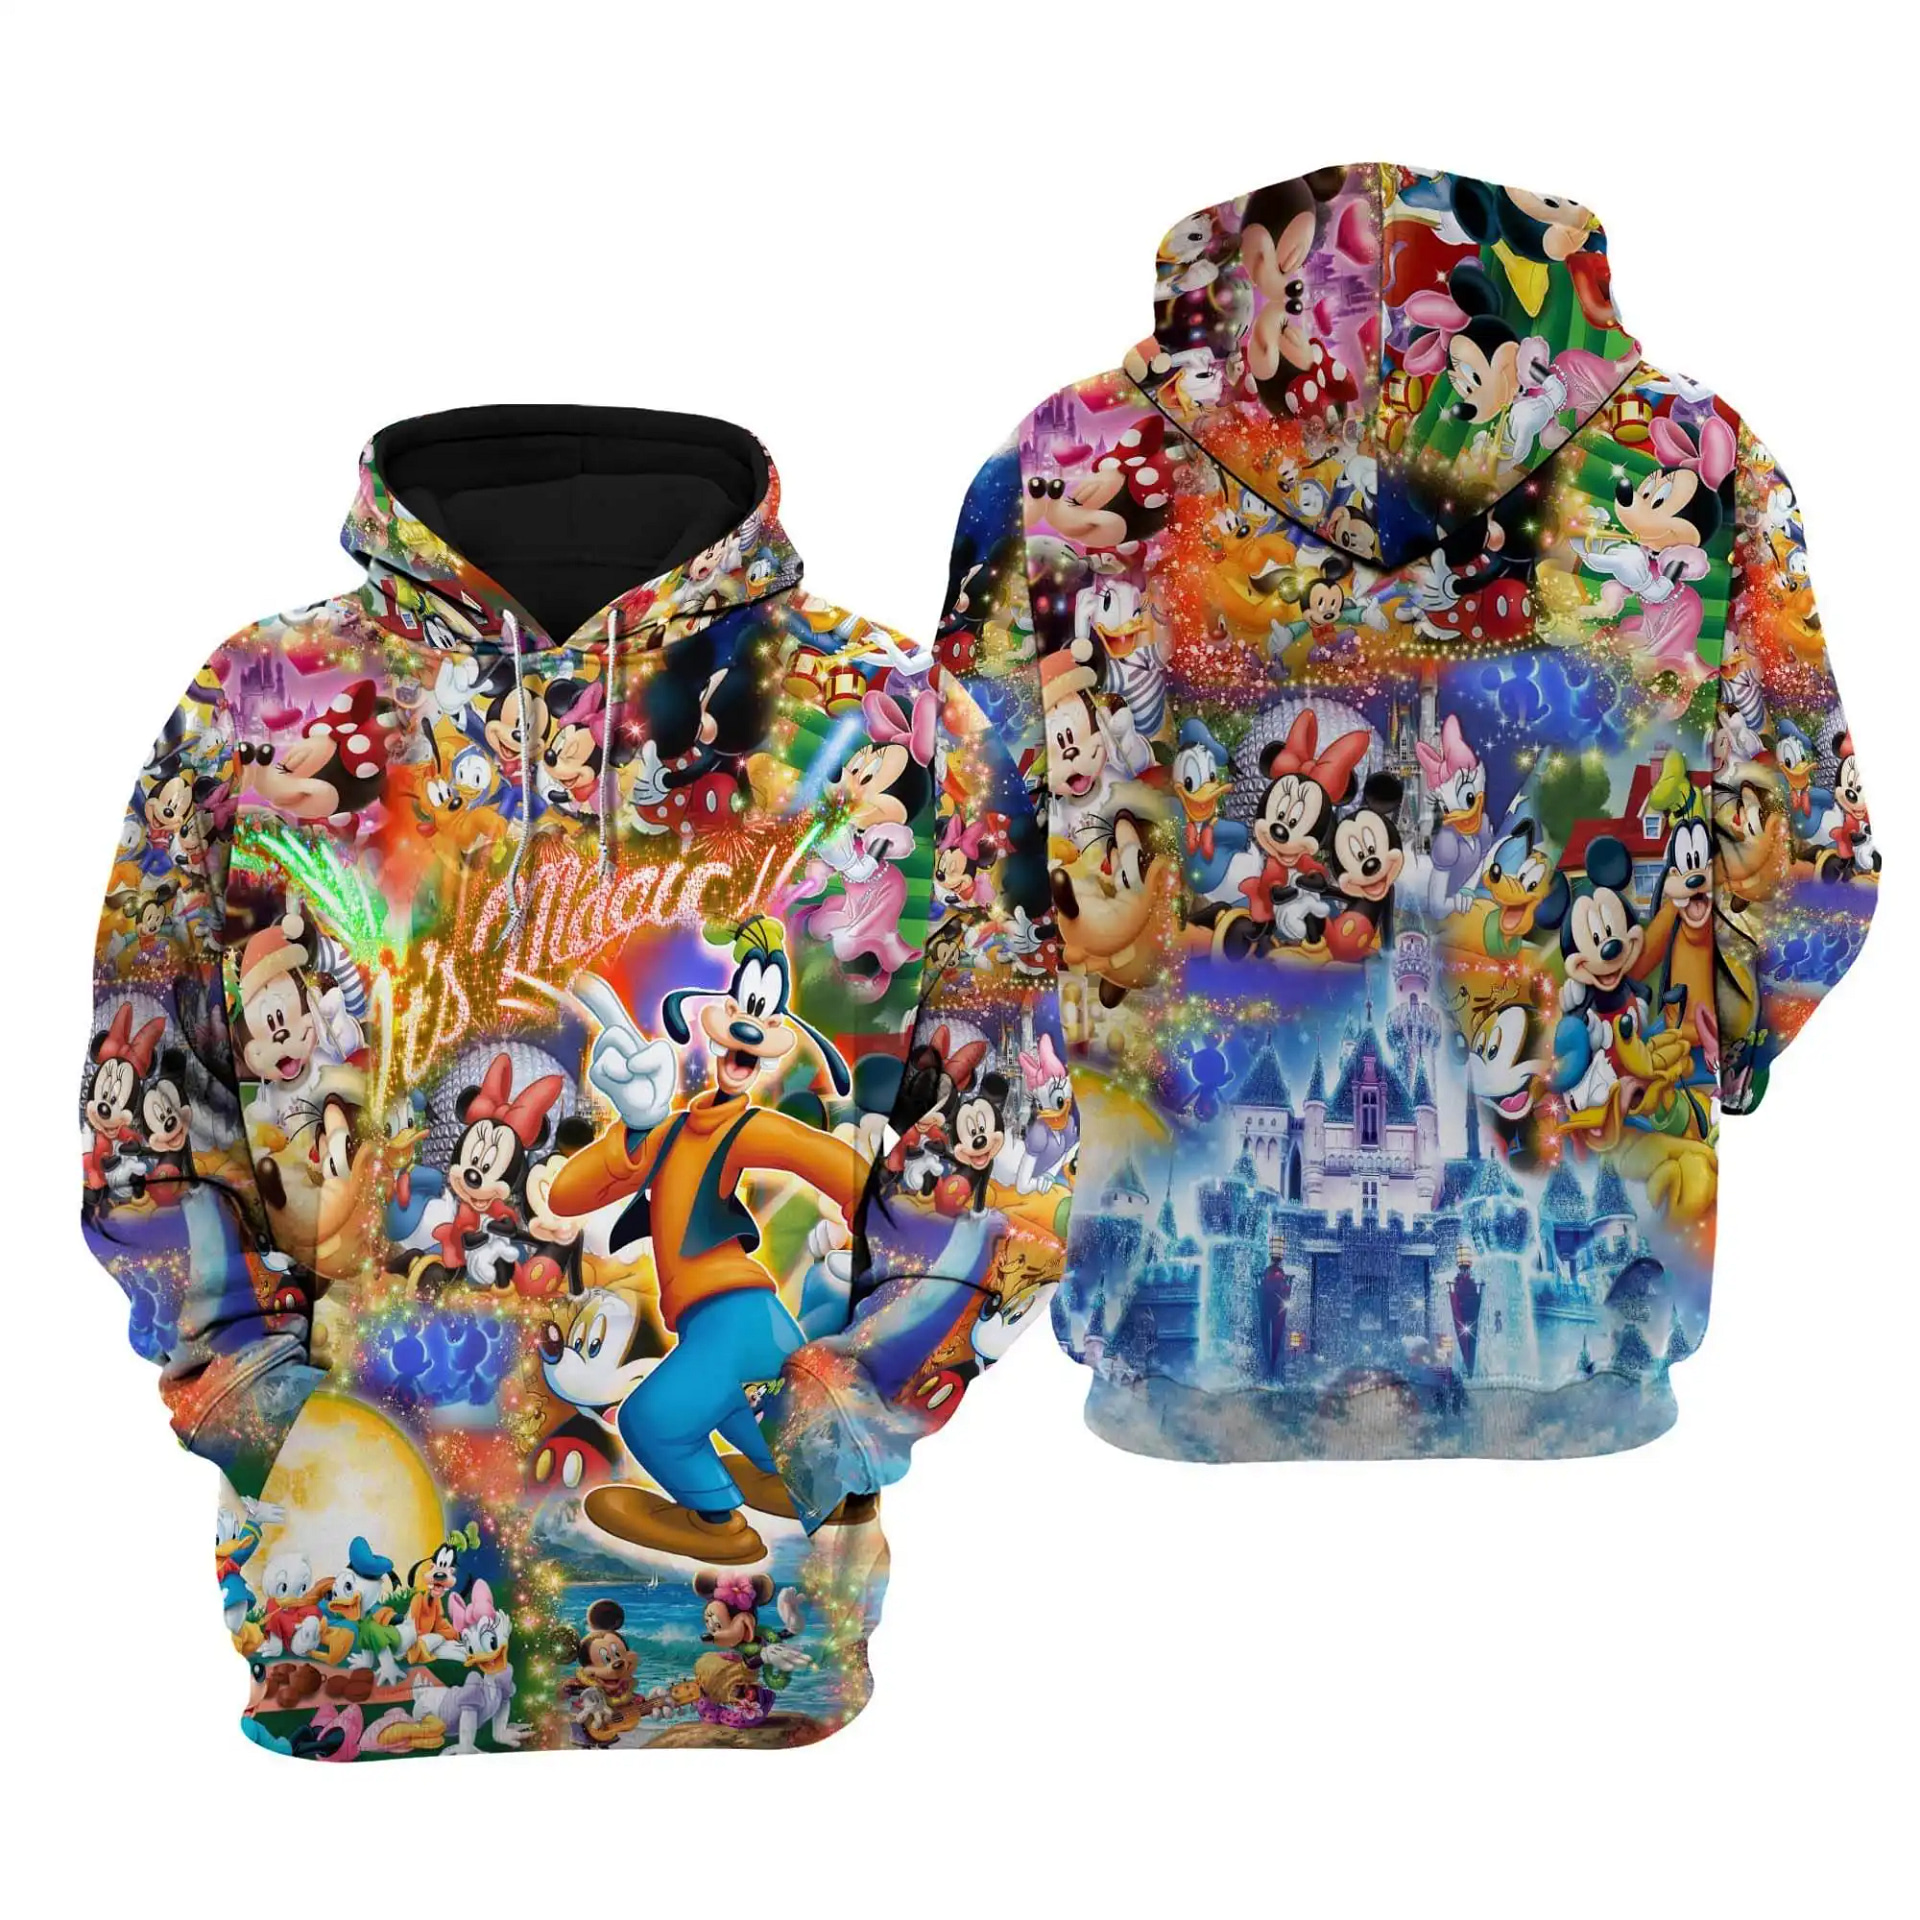 Goofy Dog And Friends Glitter Disney Cartoon Graphic Outfits Clothing Men Women Kids Toddlers Hoodie 3D